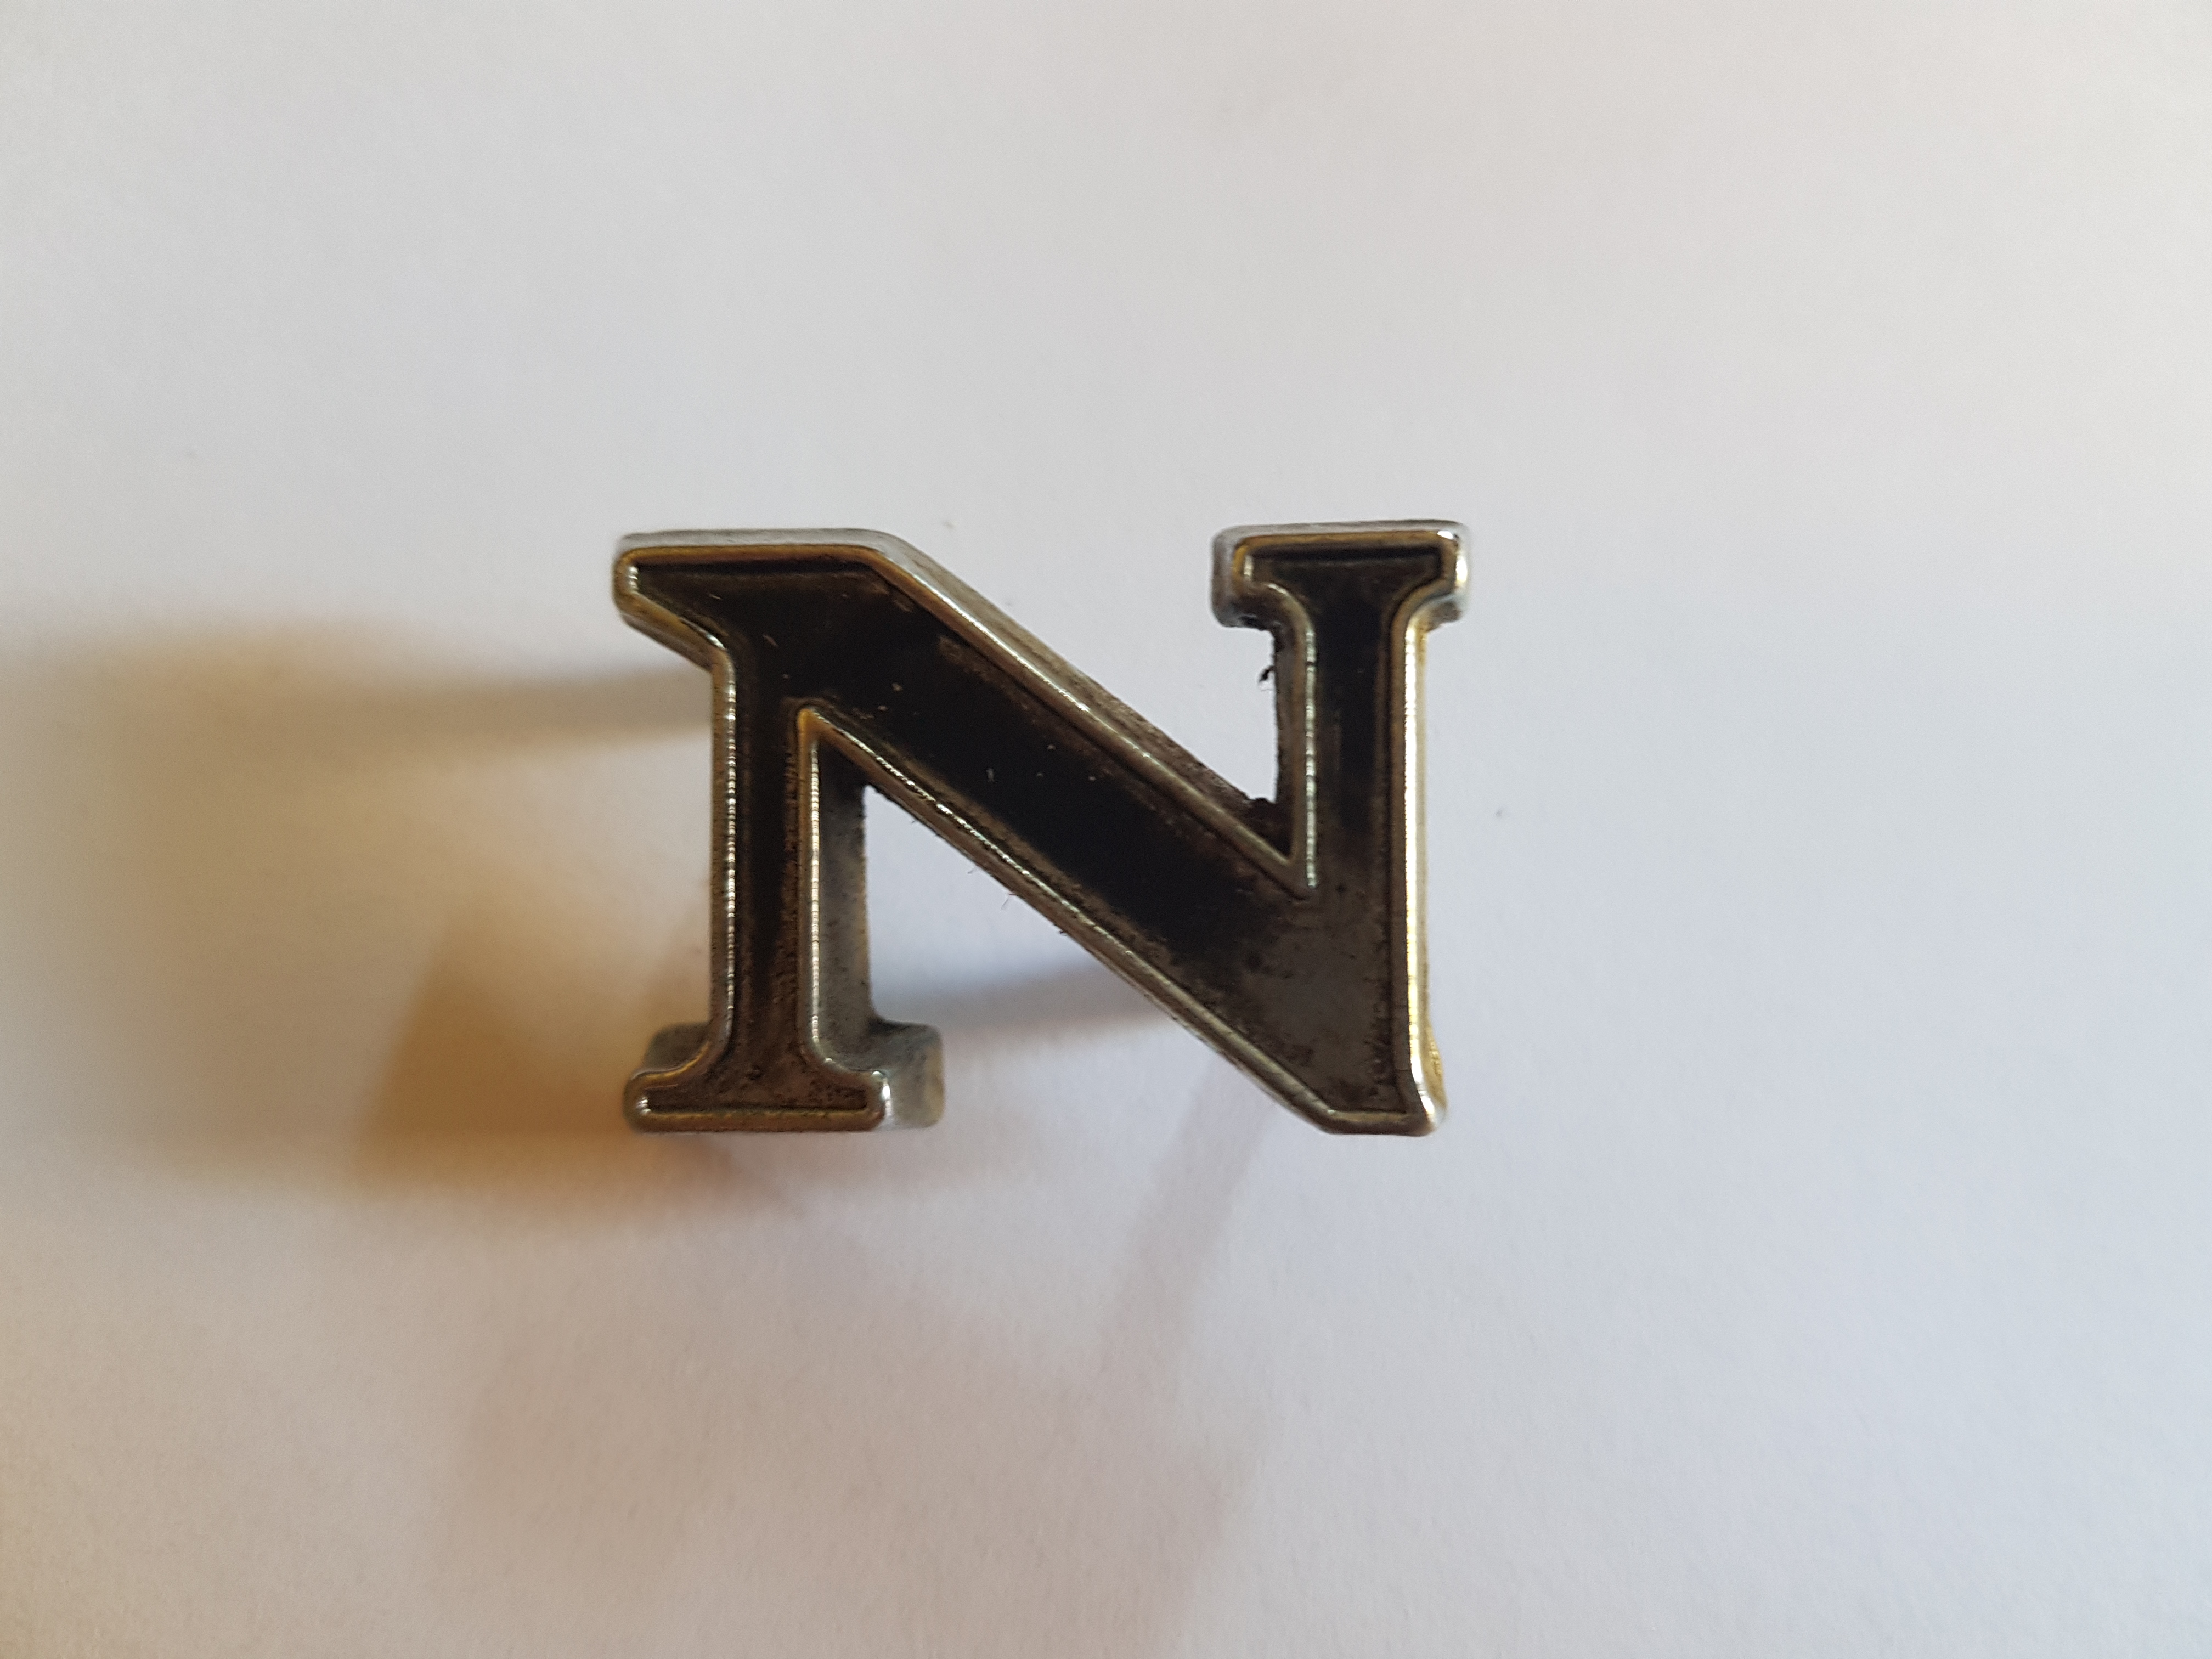 'N' Boot Letter Badge, Salvaged